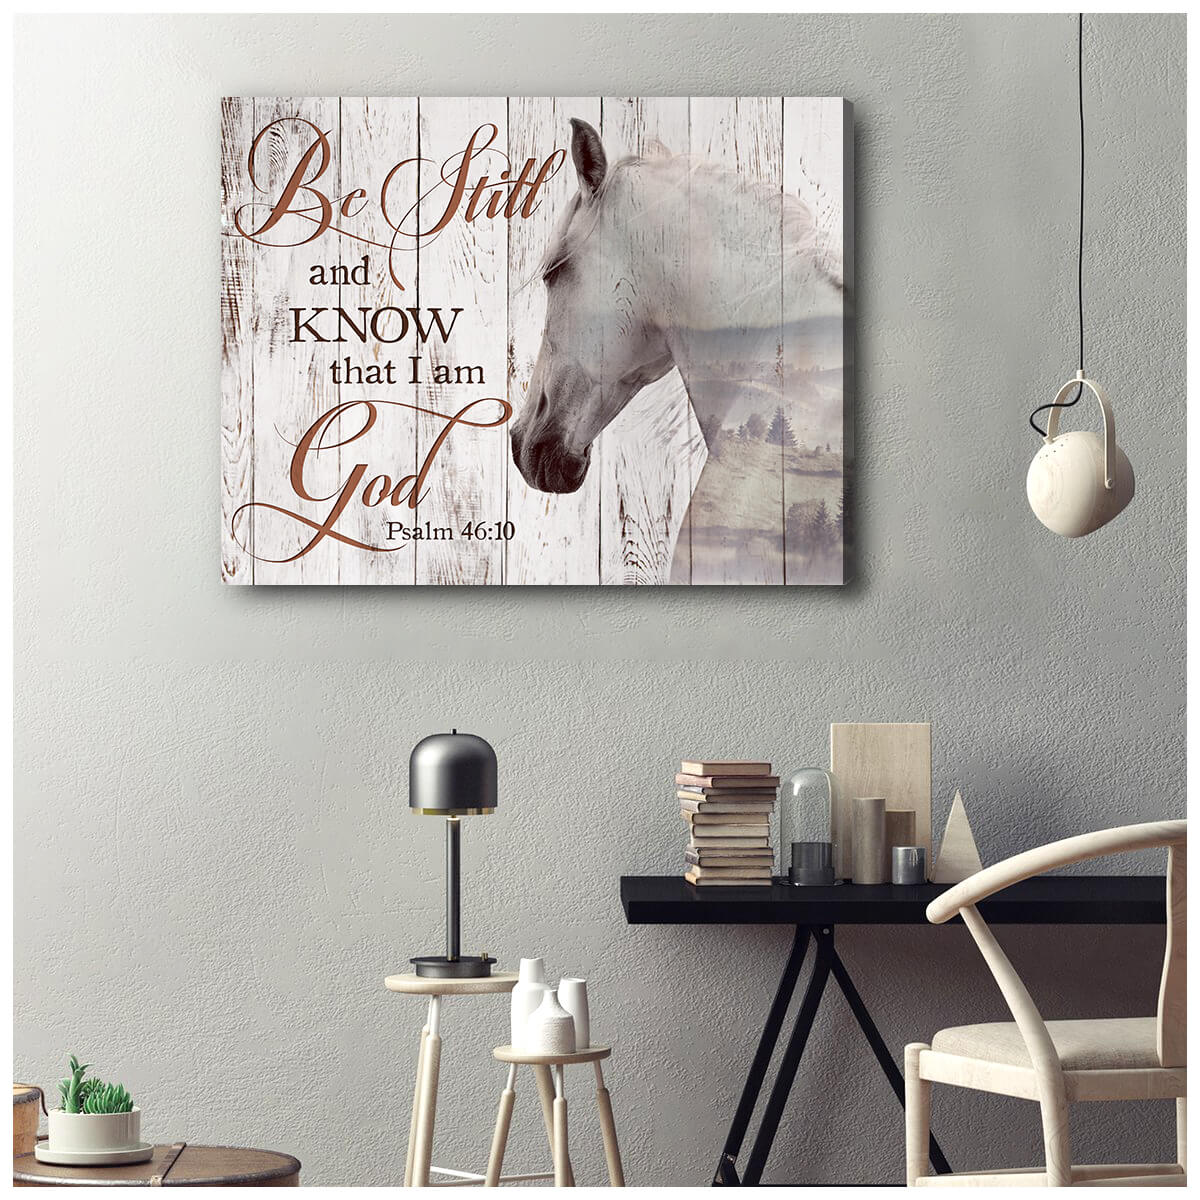 Top 10 Gorgeous Horse Canvas Be Still And Know That I Am God Wall Art Decor